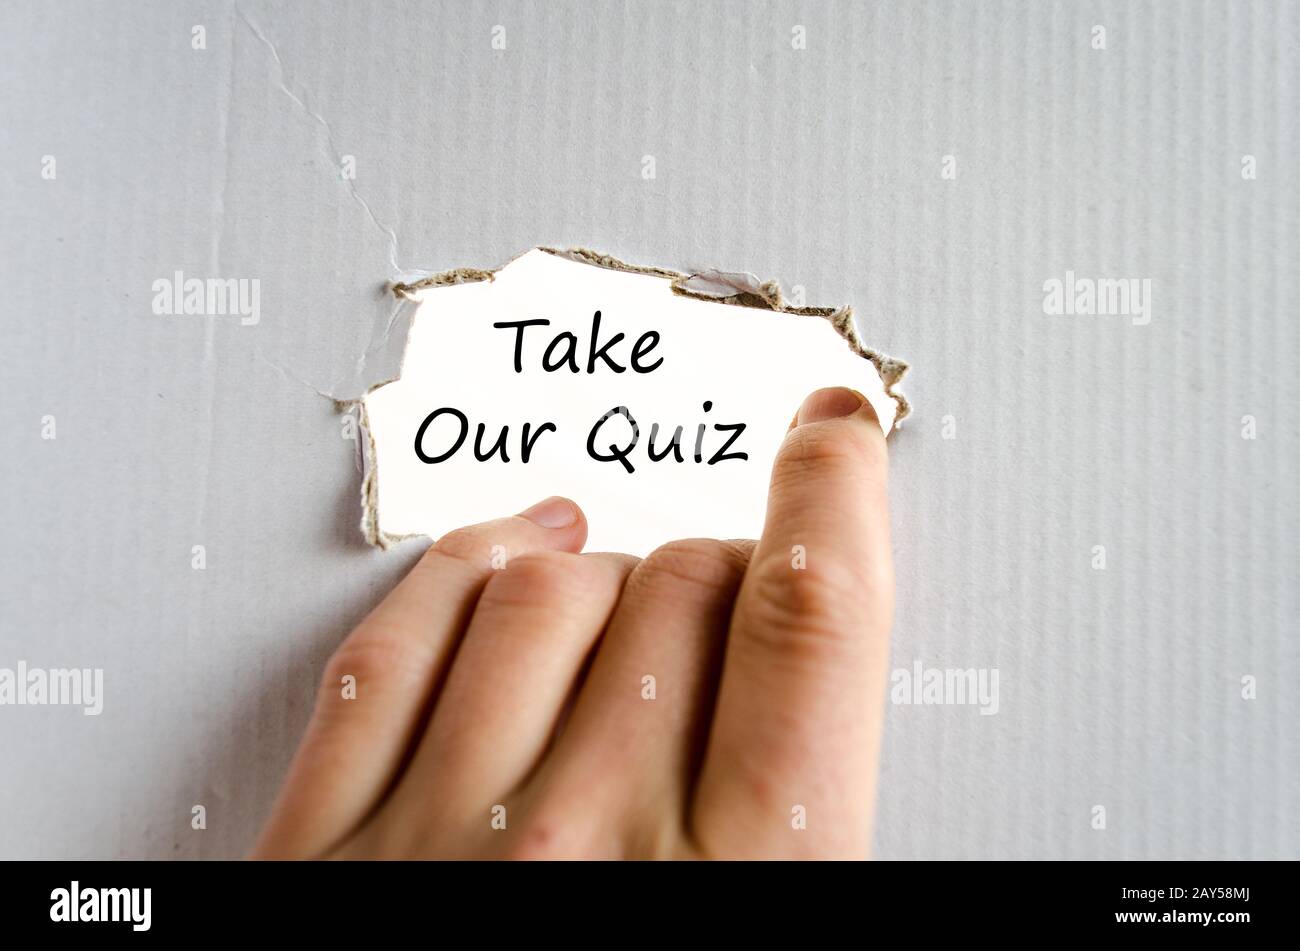 Take our quiz text concept Stock Photo